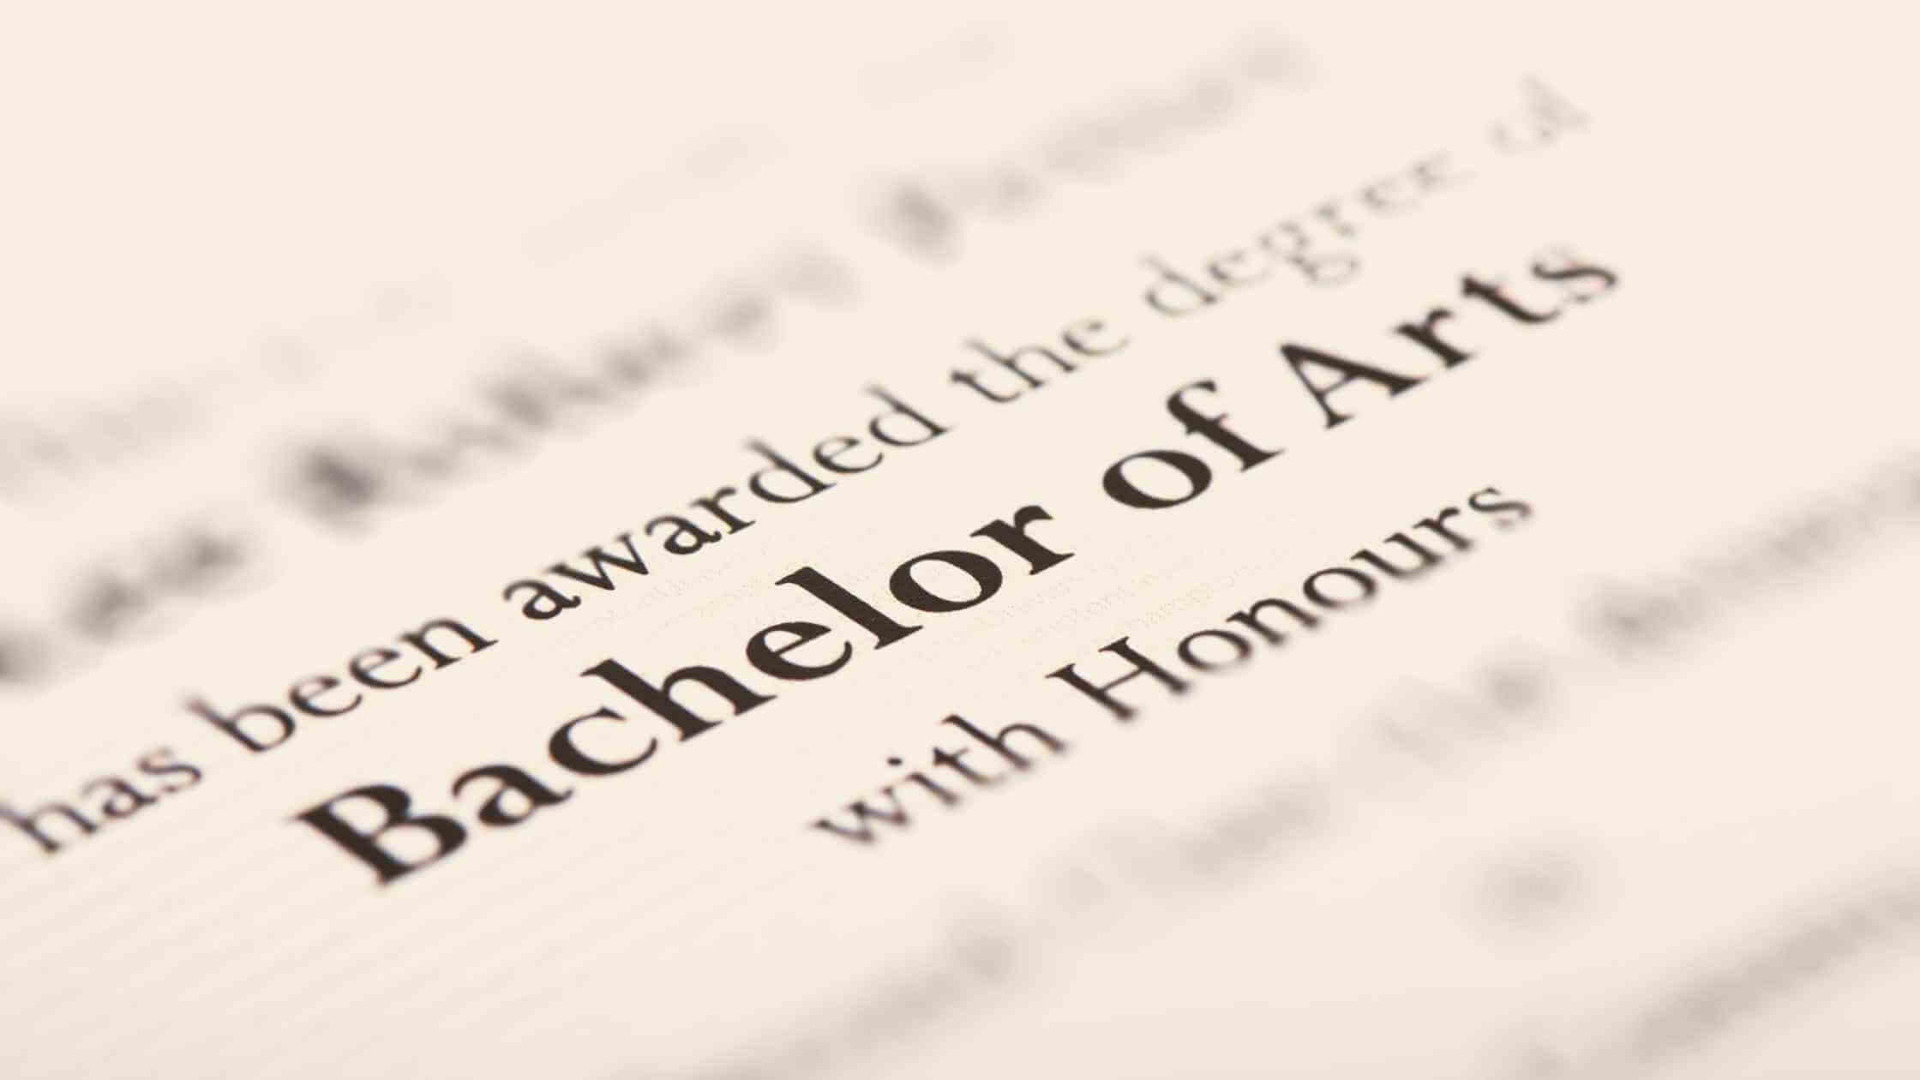 up-close look at bachelor of arts with honors diploma from university